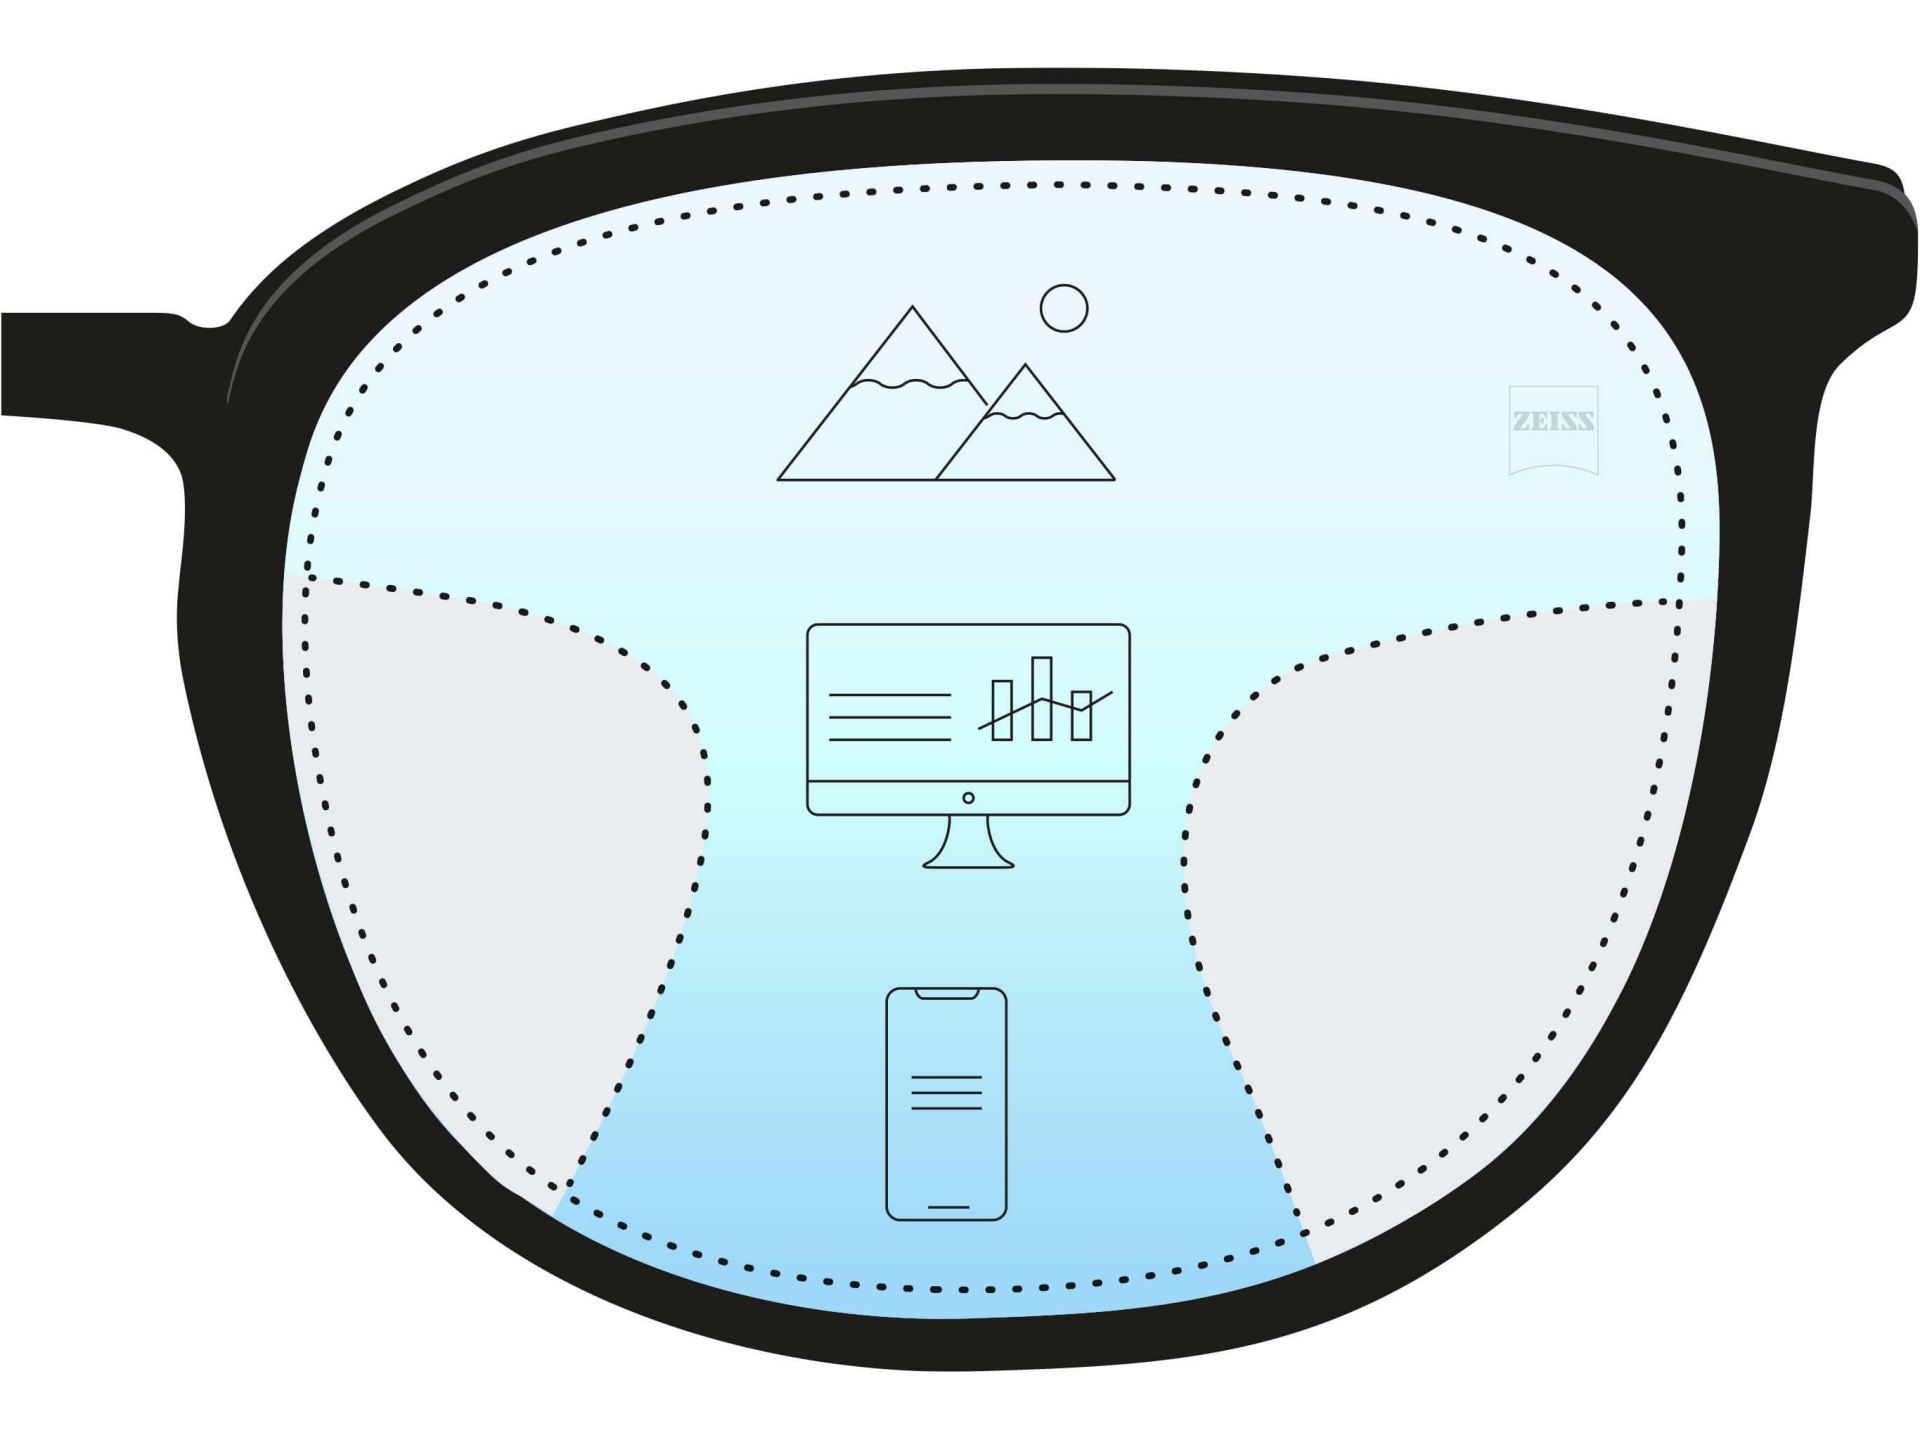 An illustration of a progressive lens showing three different zones. Three icons and color gradient indicate three prescriptions for different distances – near, intermediate and far.